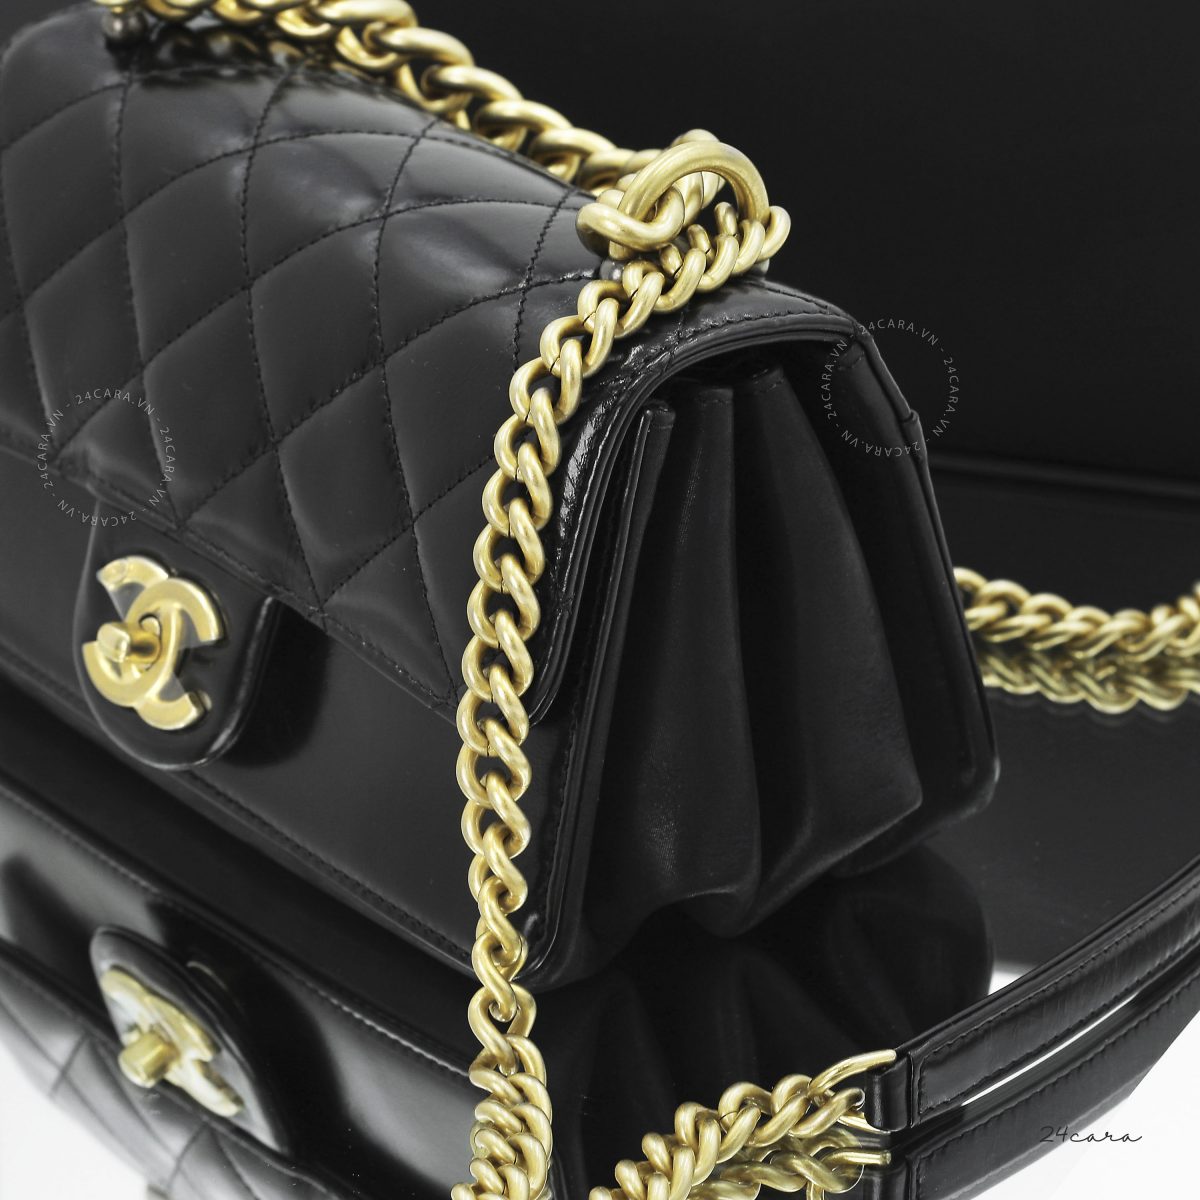 CHANEL FLAP BAG WITH GOLD HARDWARE IN LAMBSKIN LEATHER